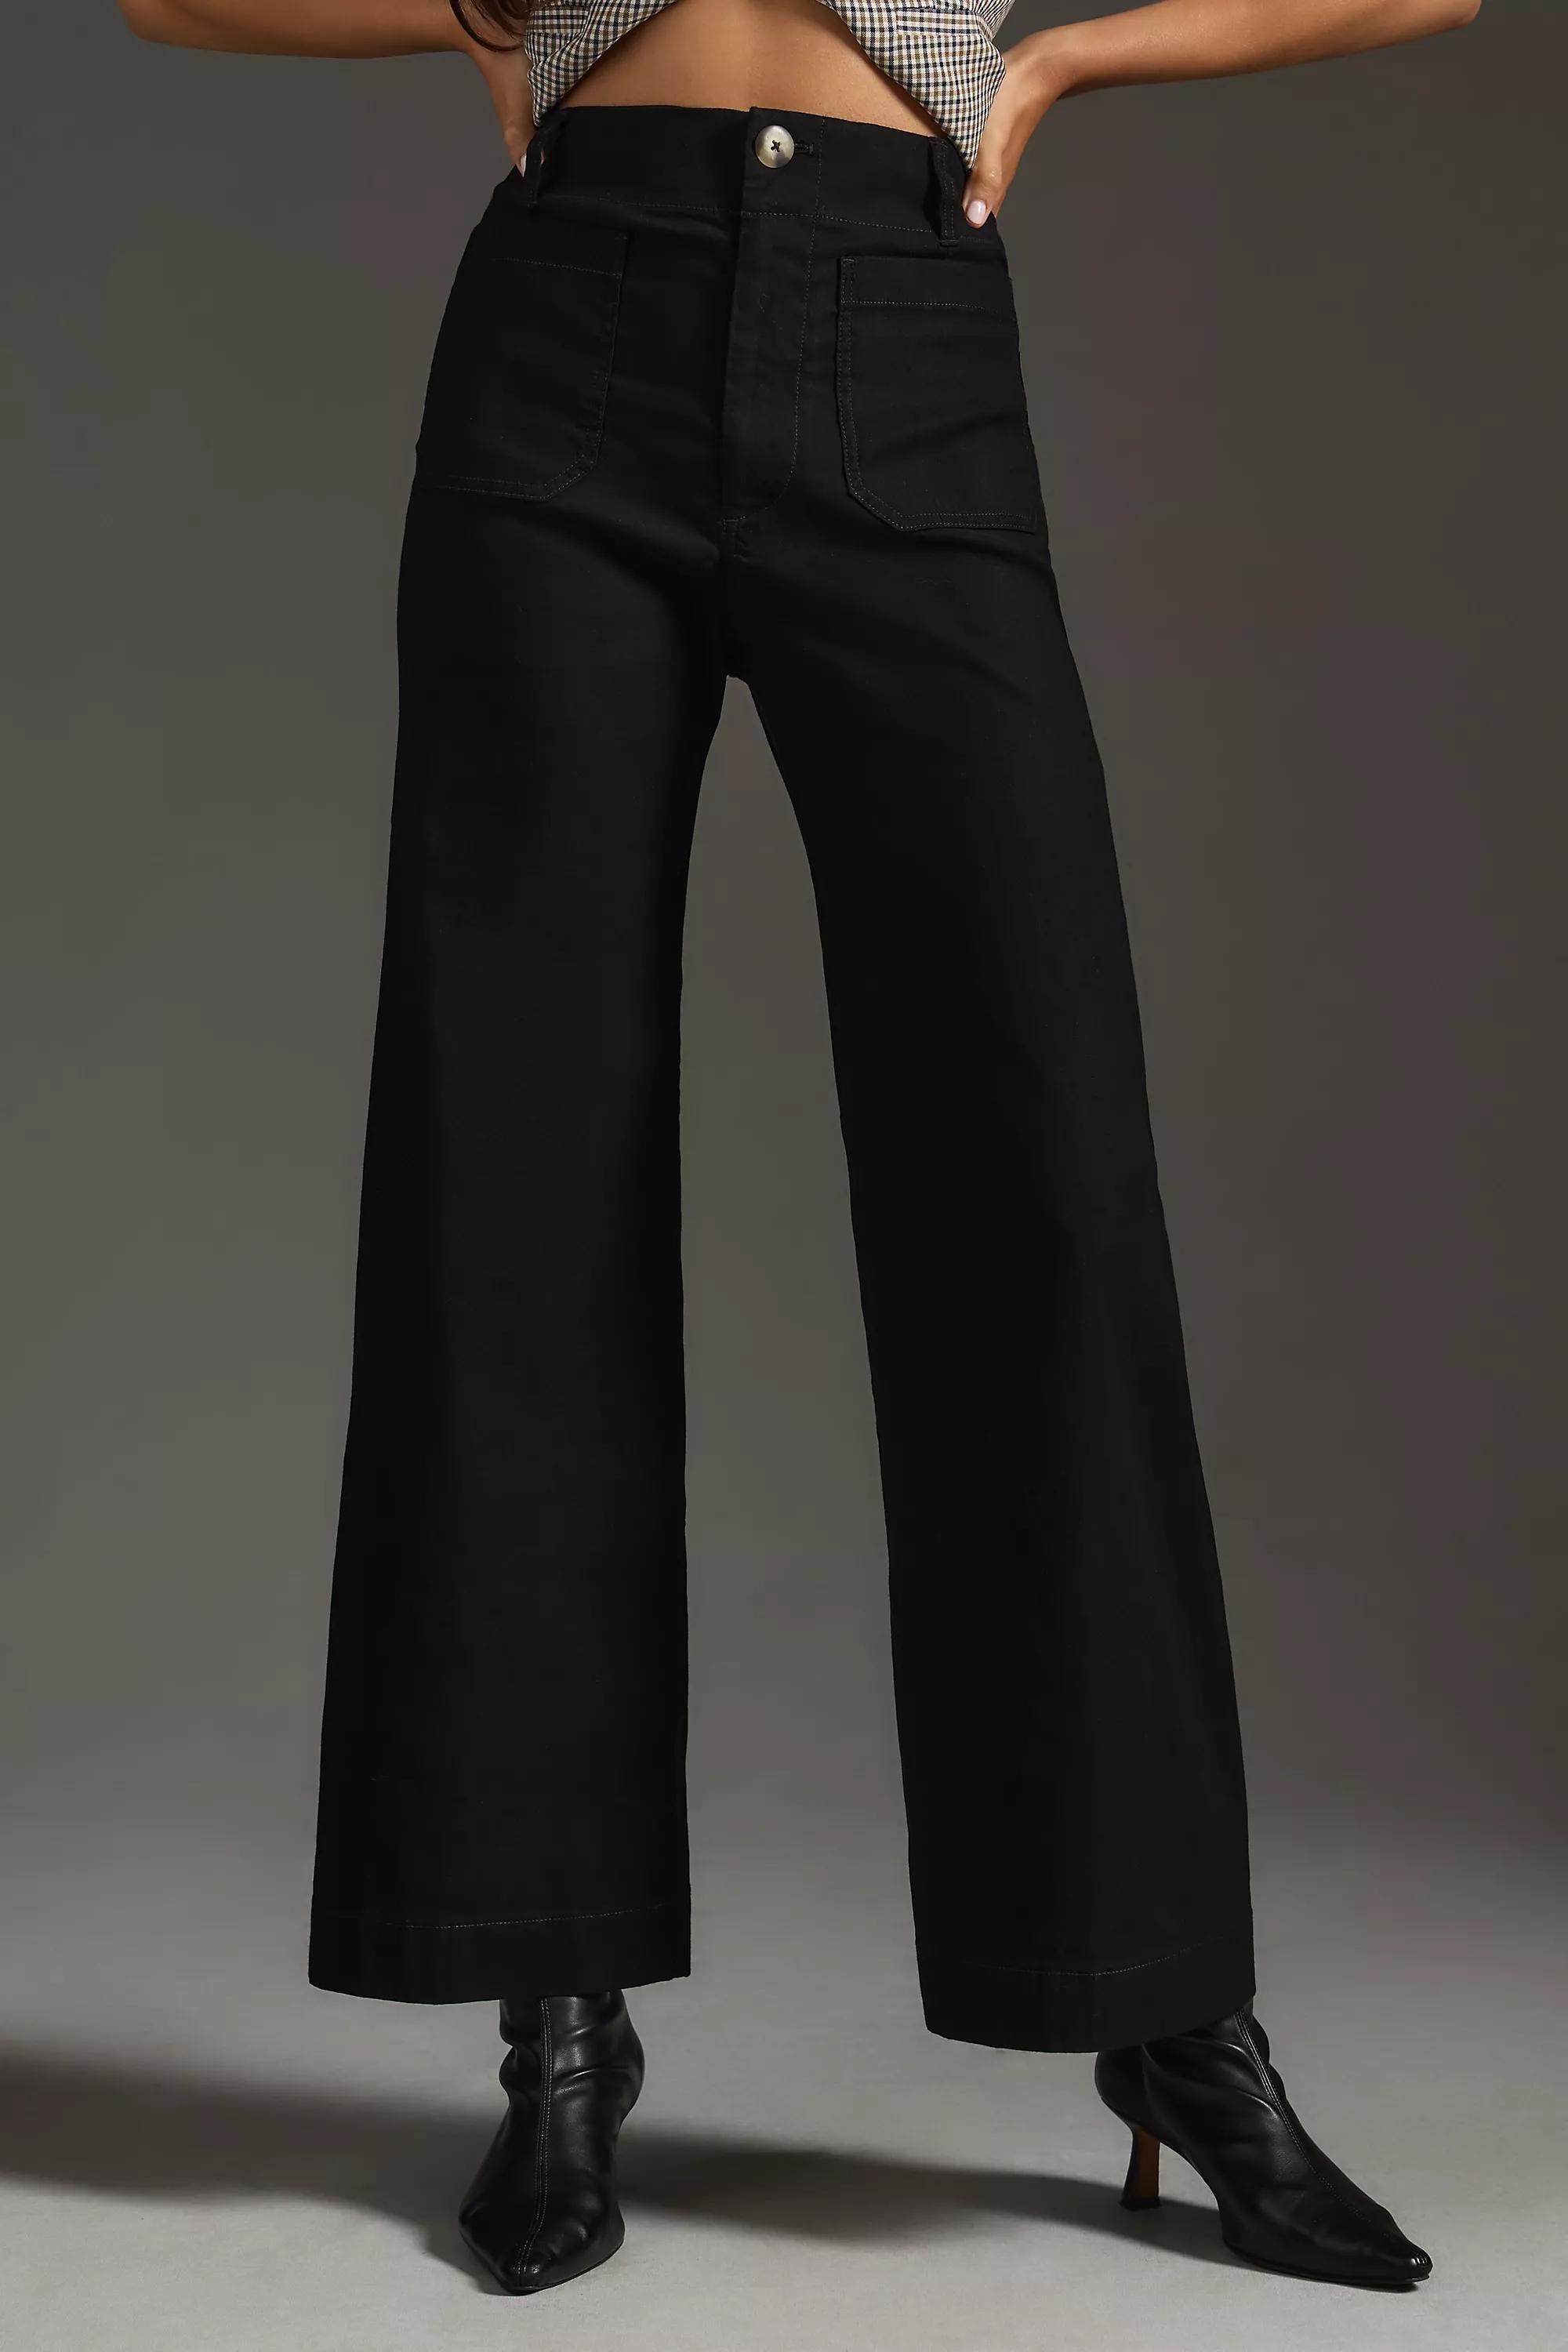 Anthropologie - Maeve The Colette Wide-Leg Trousers, Black